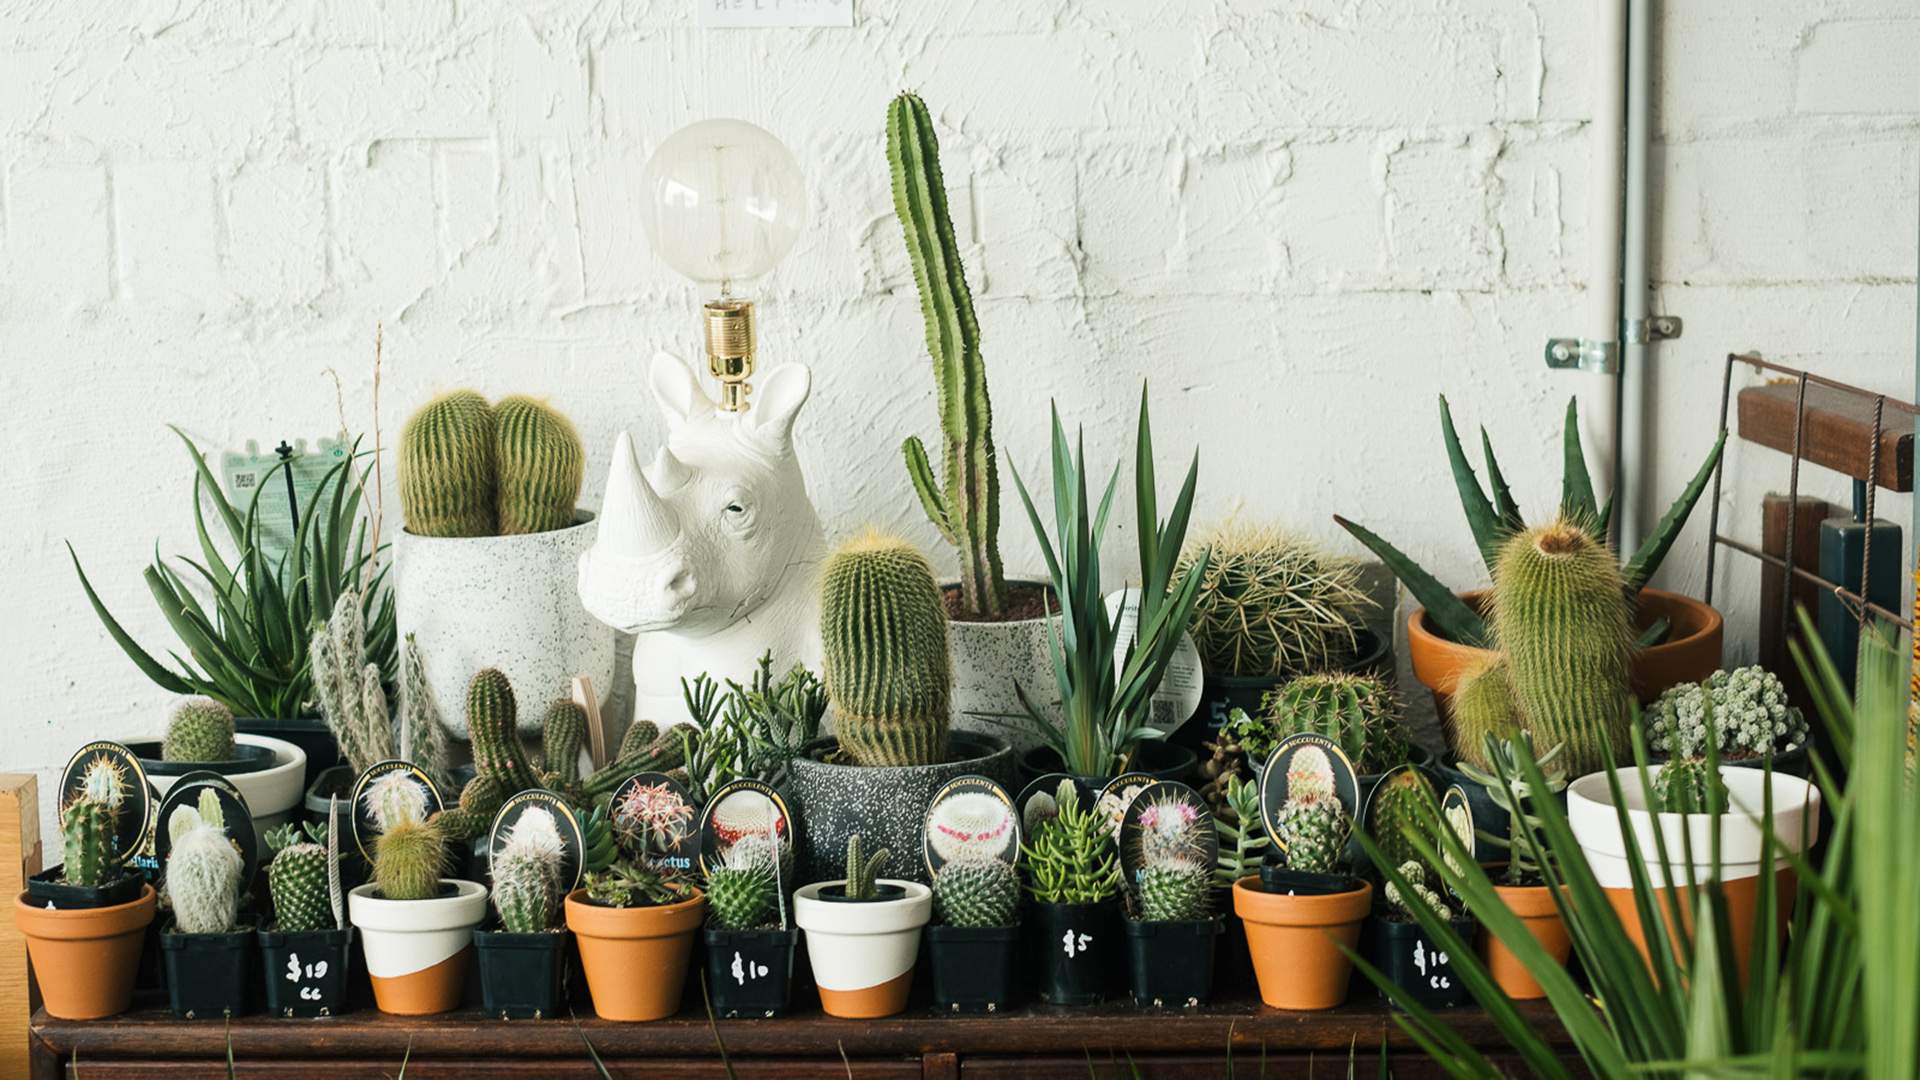 Jungle Collective 'Let's Get Physical' Indoor Plant Warehouse Sale